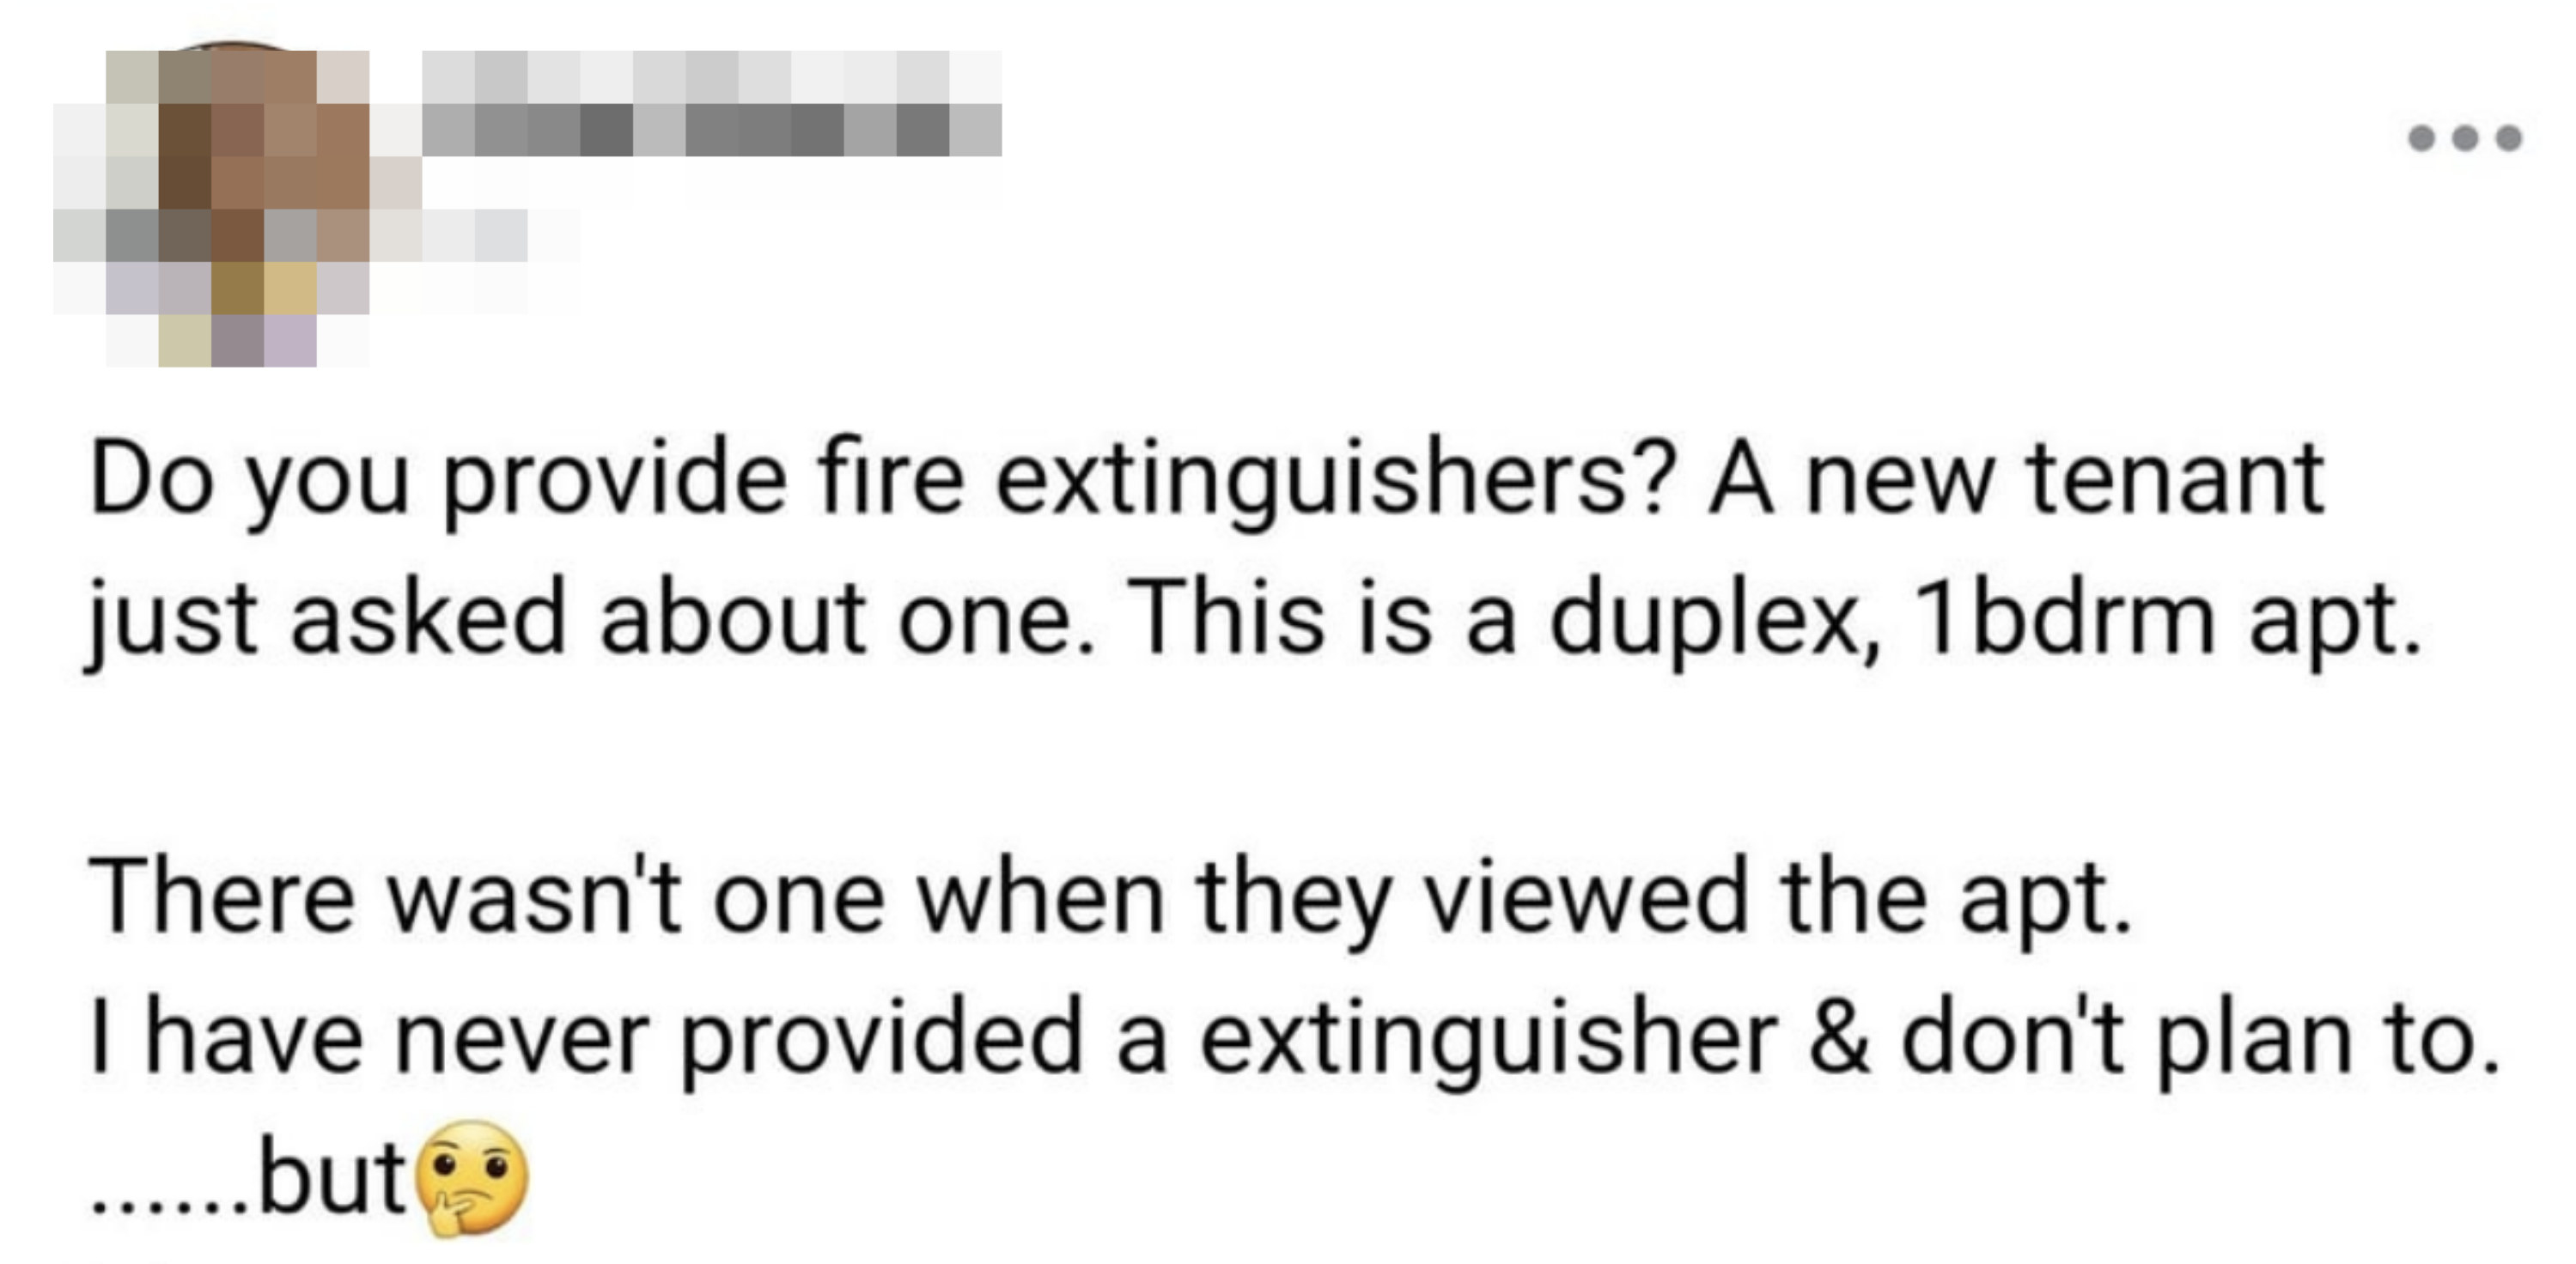 A new tenant of a duplex 1BR asks about fire extinguishers and is told there wasn&#x27;t one when they viewed the apartment and no, the landlord has never provided one and doesn&#x27;t plan to